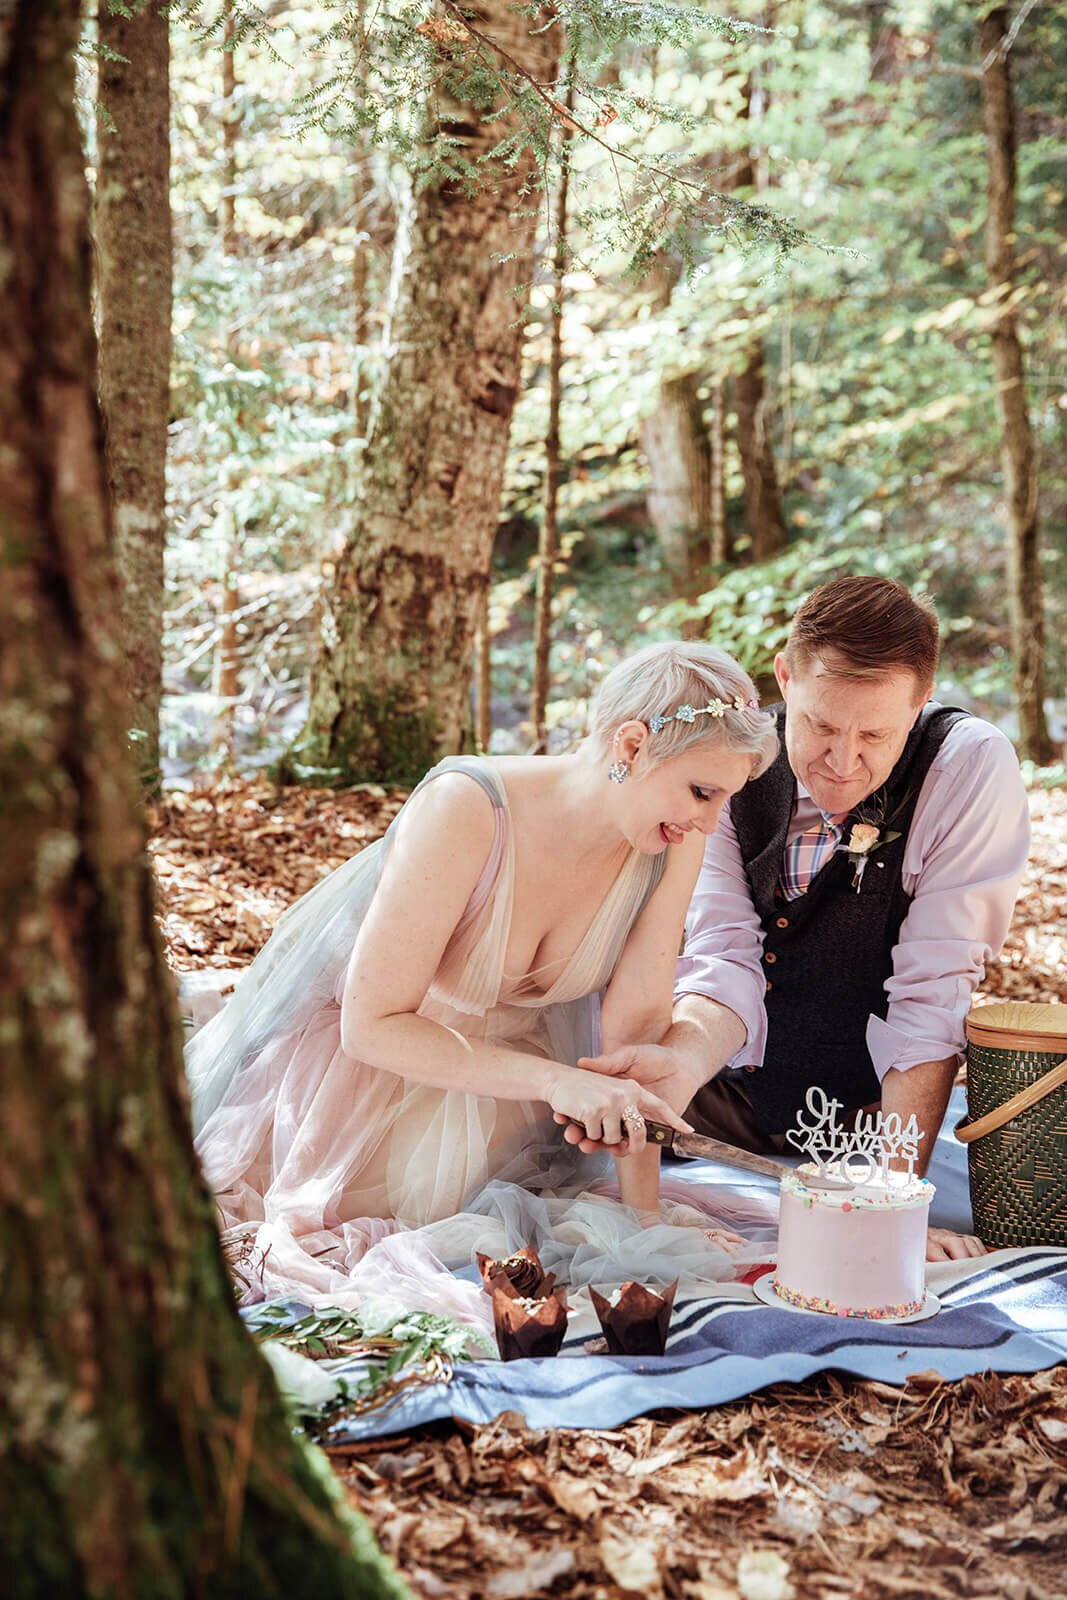  Bride and groom cut the cake at their picnic after a Vermont elopement 